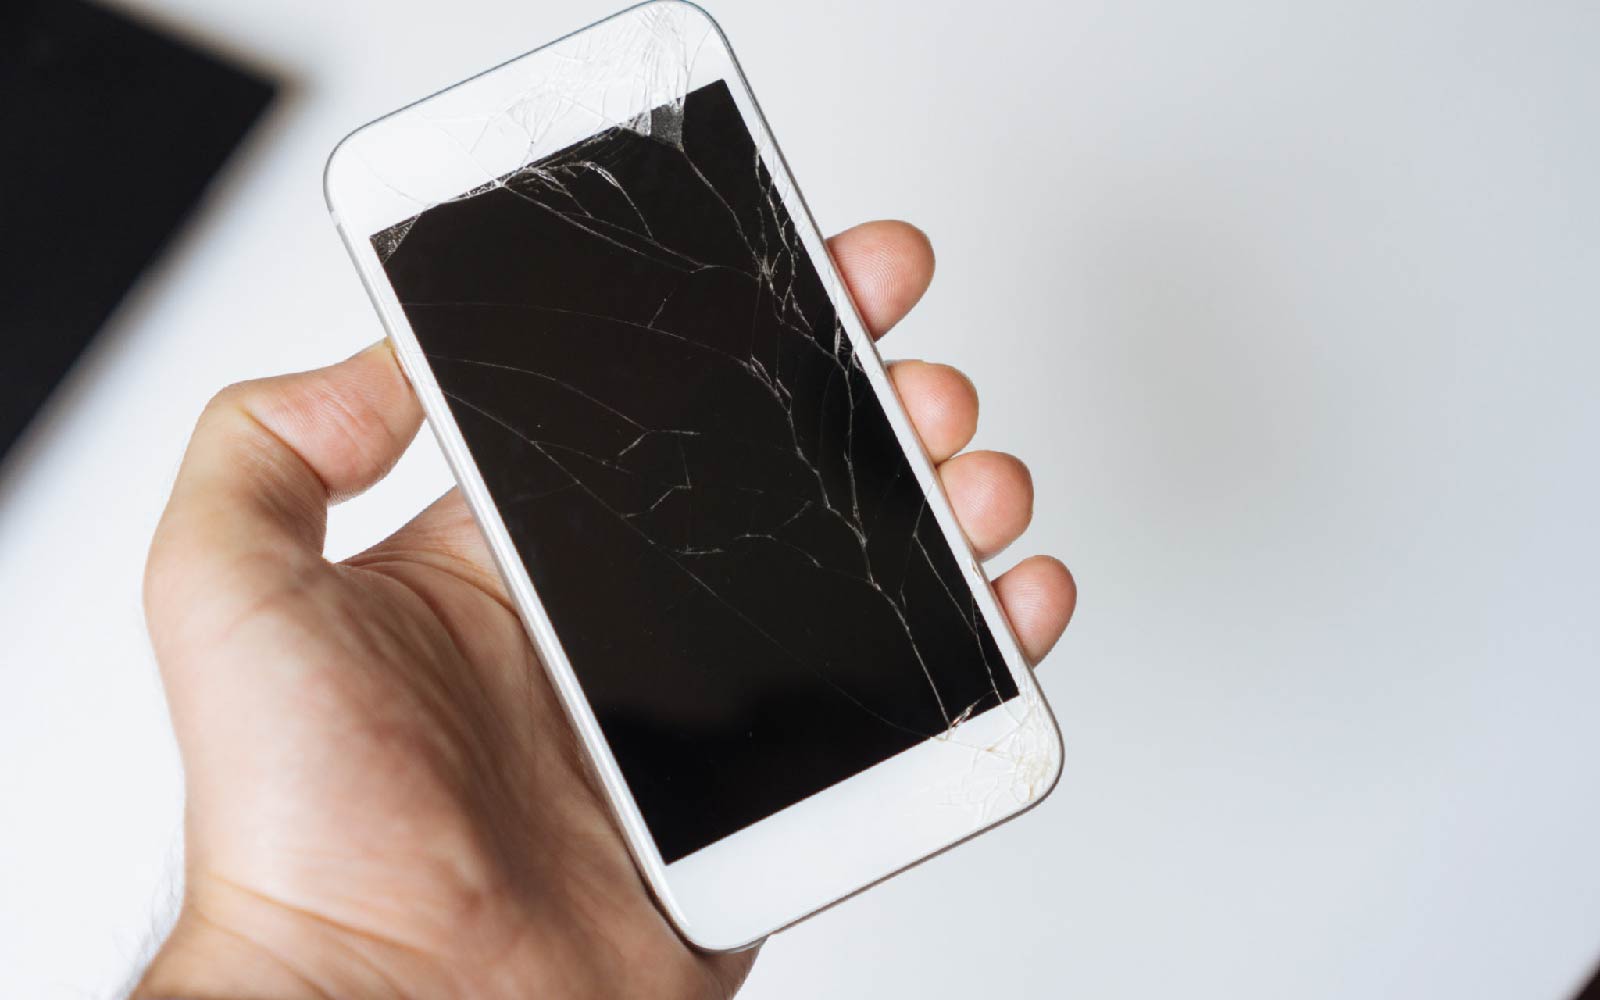 How To Repair Phone Scratches: Here Are Some Ways